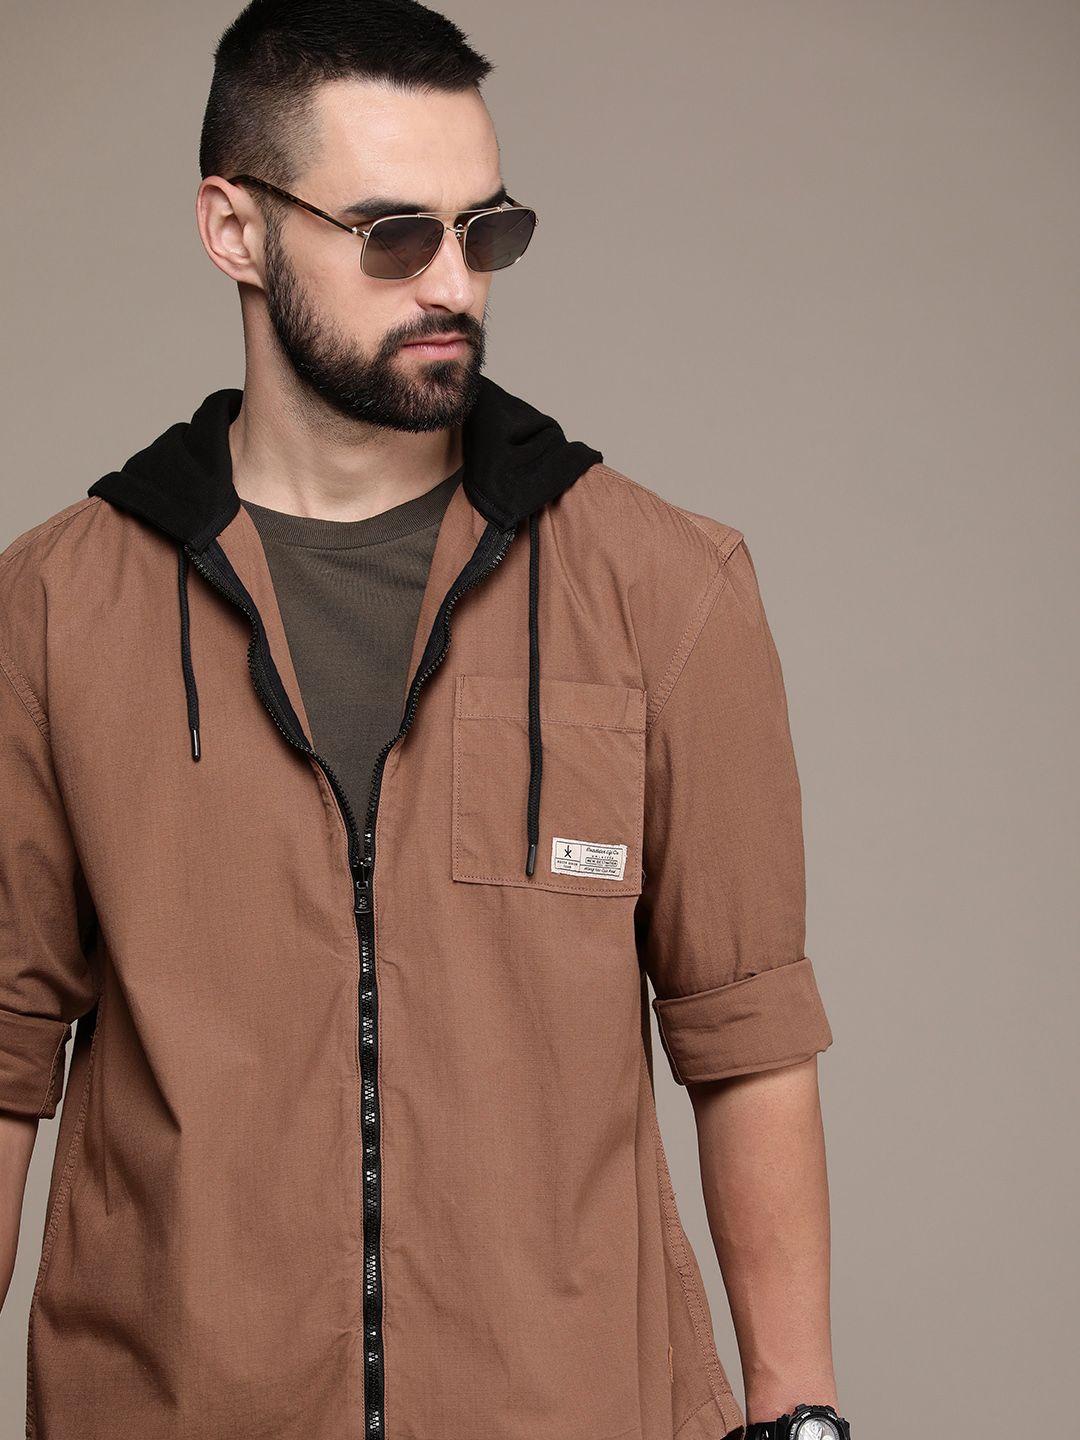 the roadster life co. solid relaxed fit pure cotton hooded casual shirt